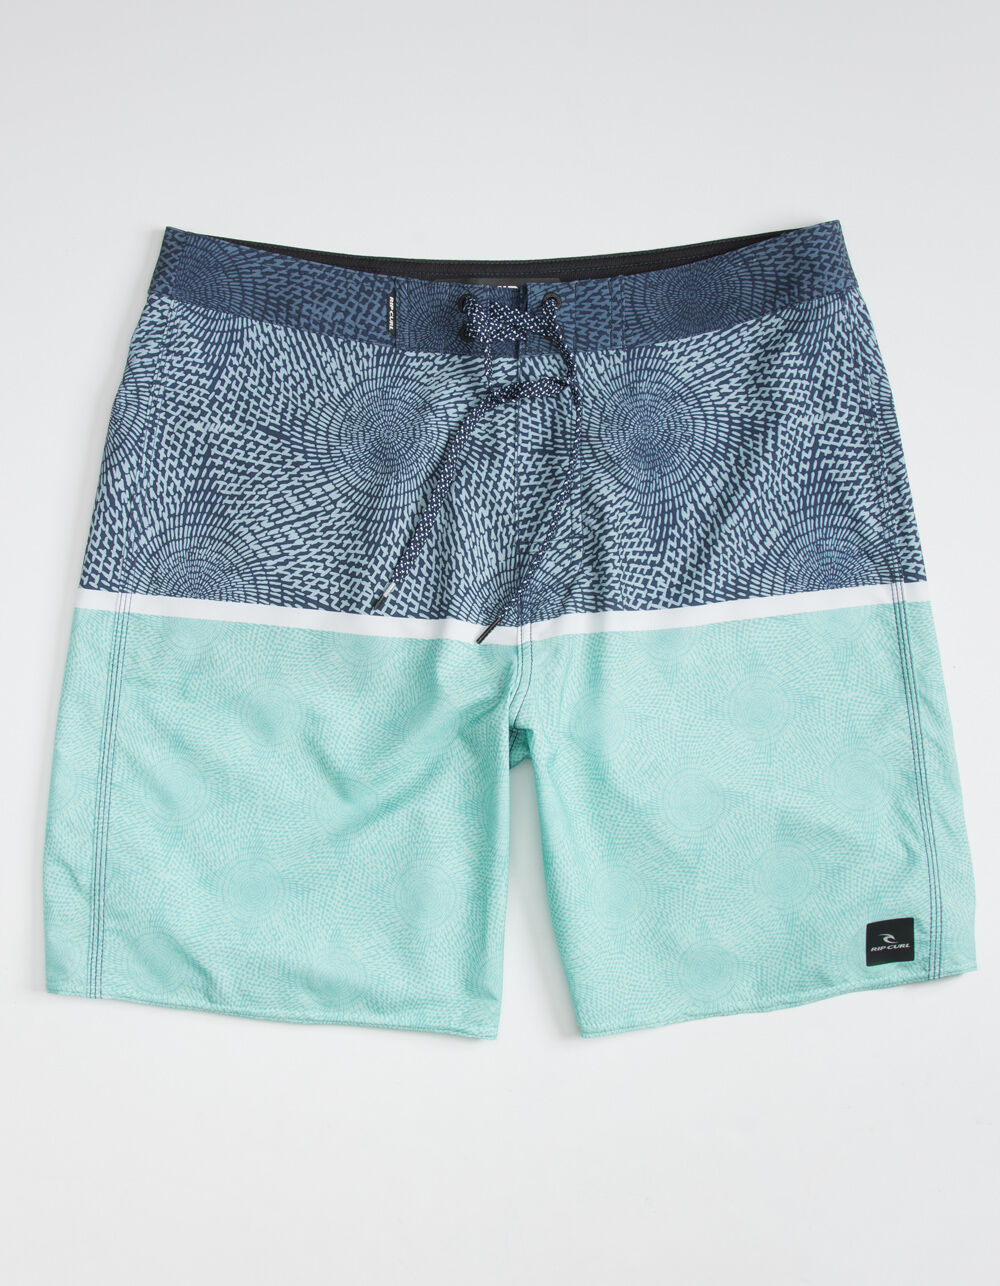 RIP CURL Mirage Combined 2.0 Mens Boardshorts image number 0